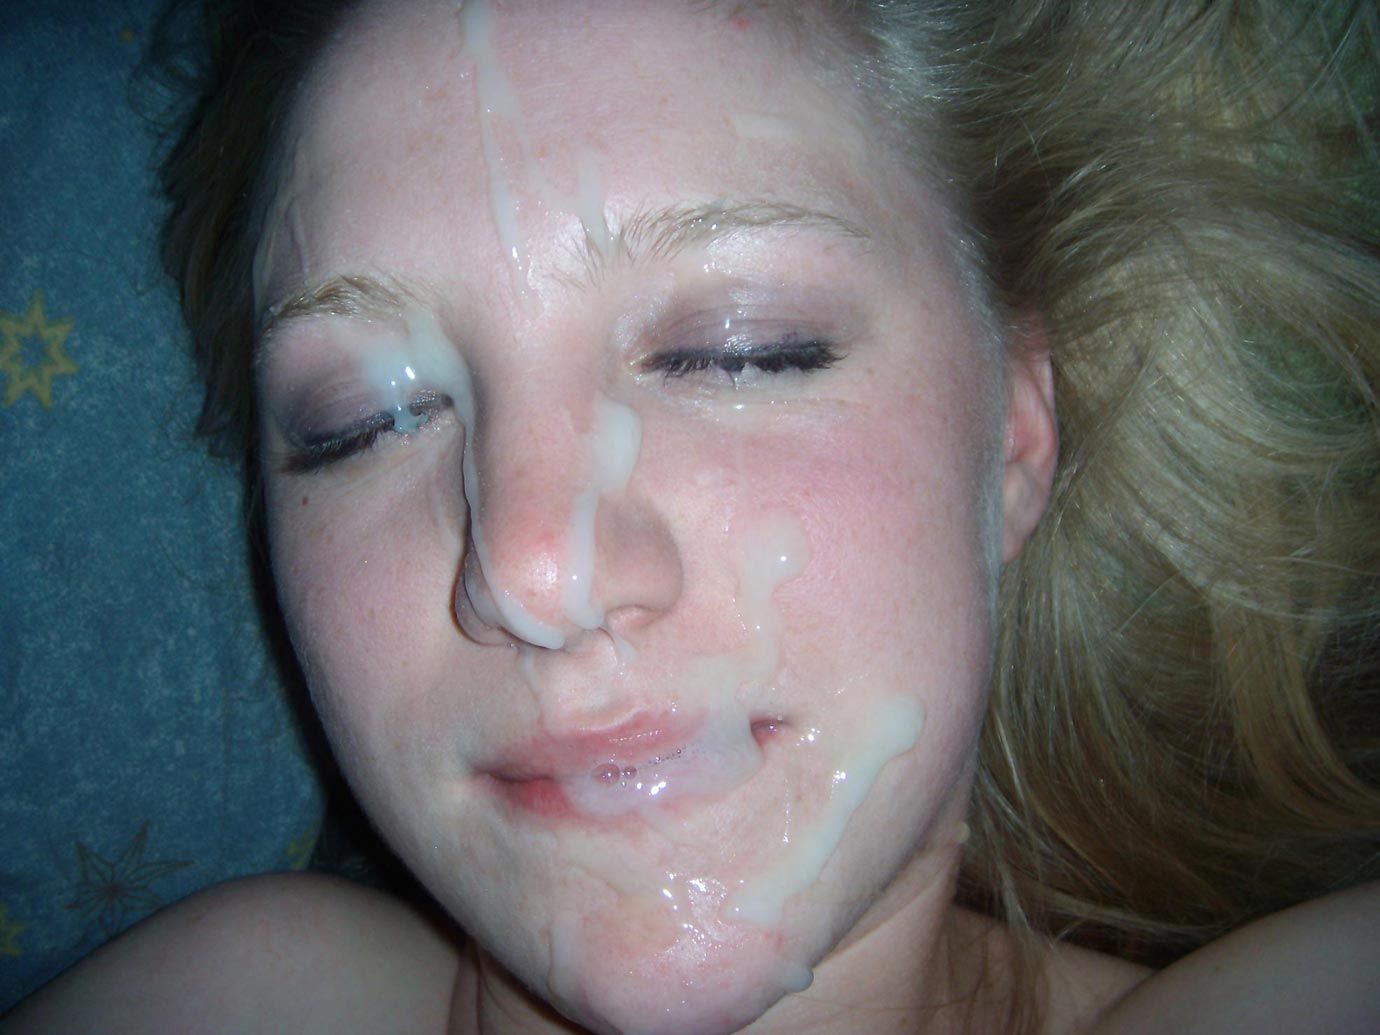 My GF ended with a nice amount of my spunk on her face